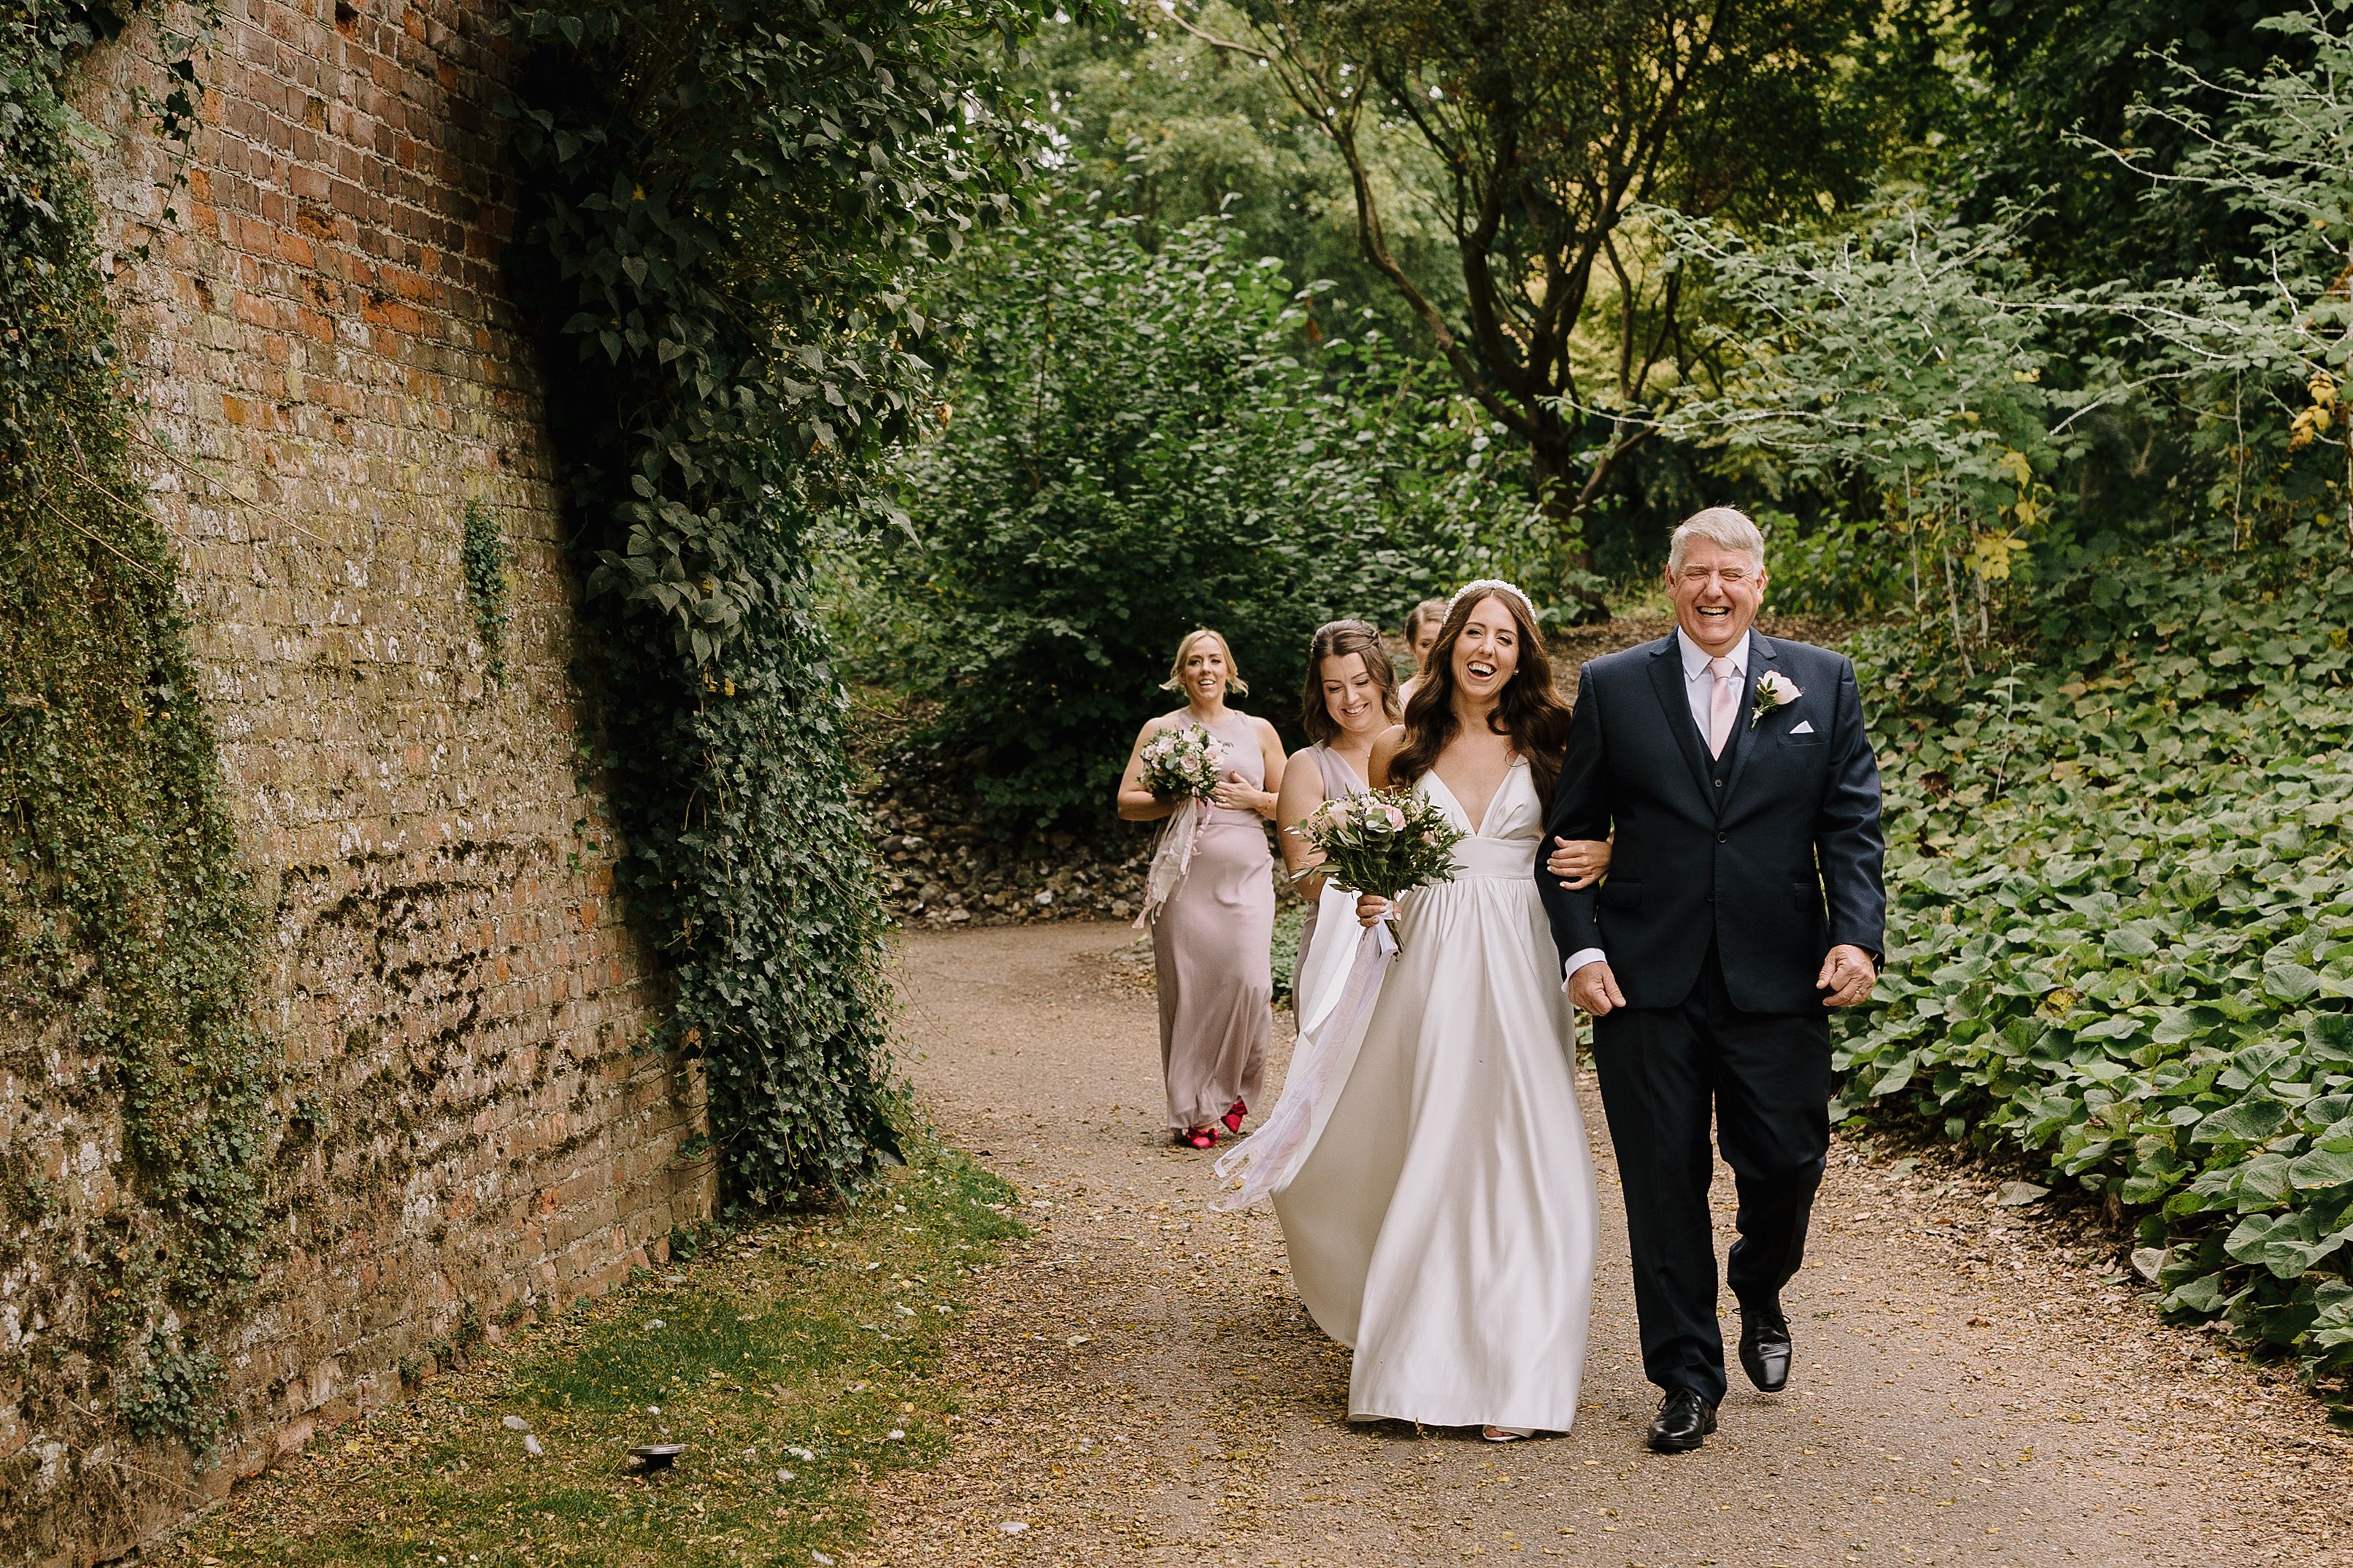 A bride with her bridesmaids and father of the bride laughing on their way to the wedding